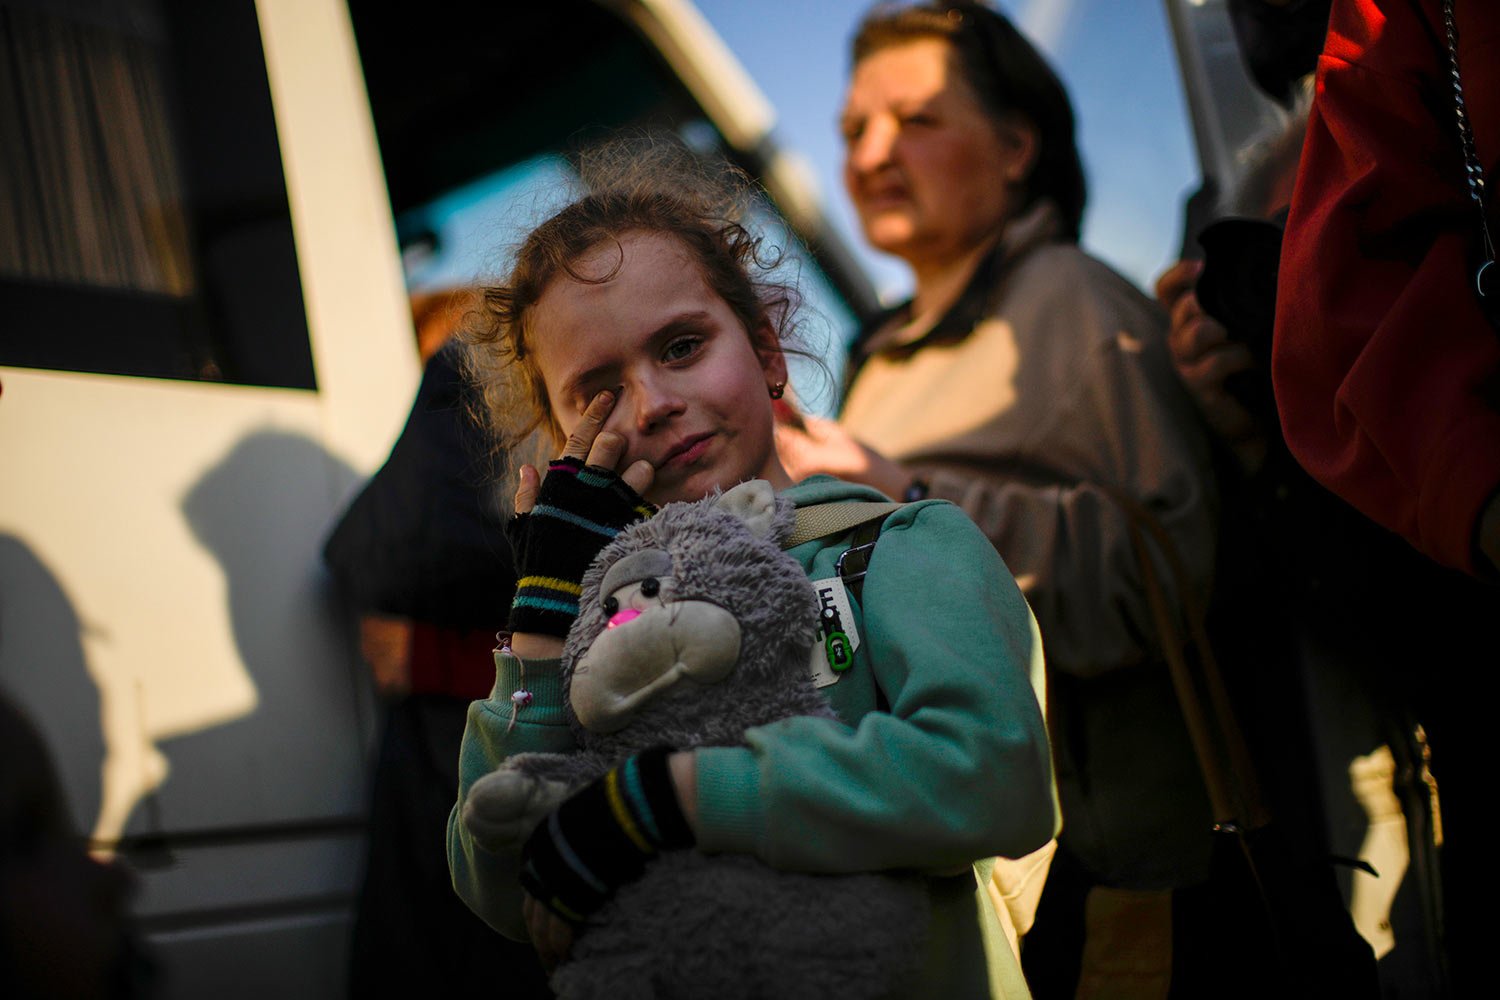  A child and her family who fled from Mariupol arrive at a reception center for displaced people in Zaporizhzhia, Ukraine, Sunday, May 8, 2022. (AP Photo/Francisco Seco) 